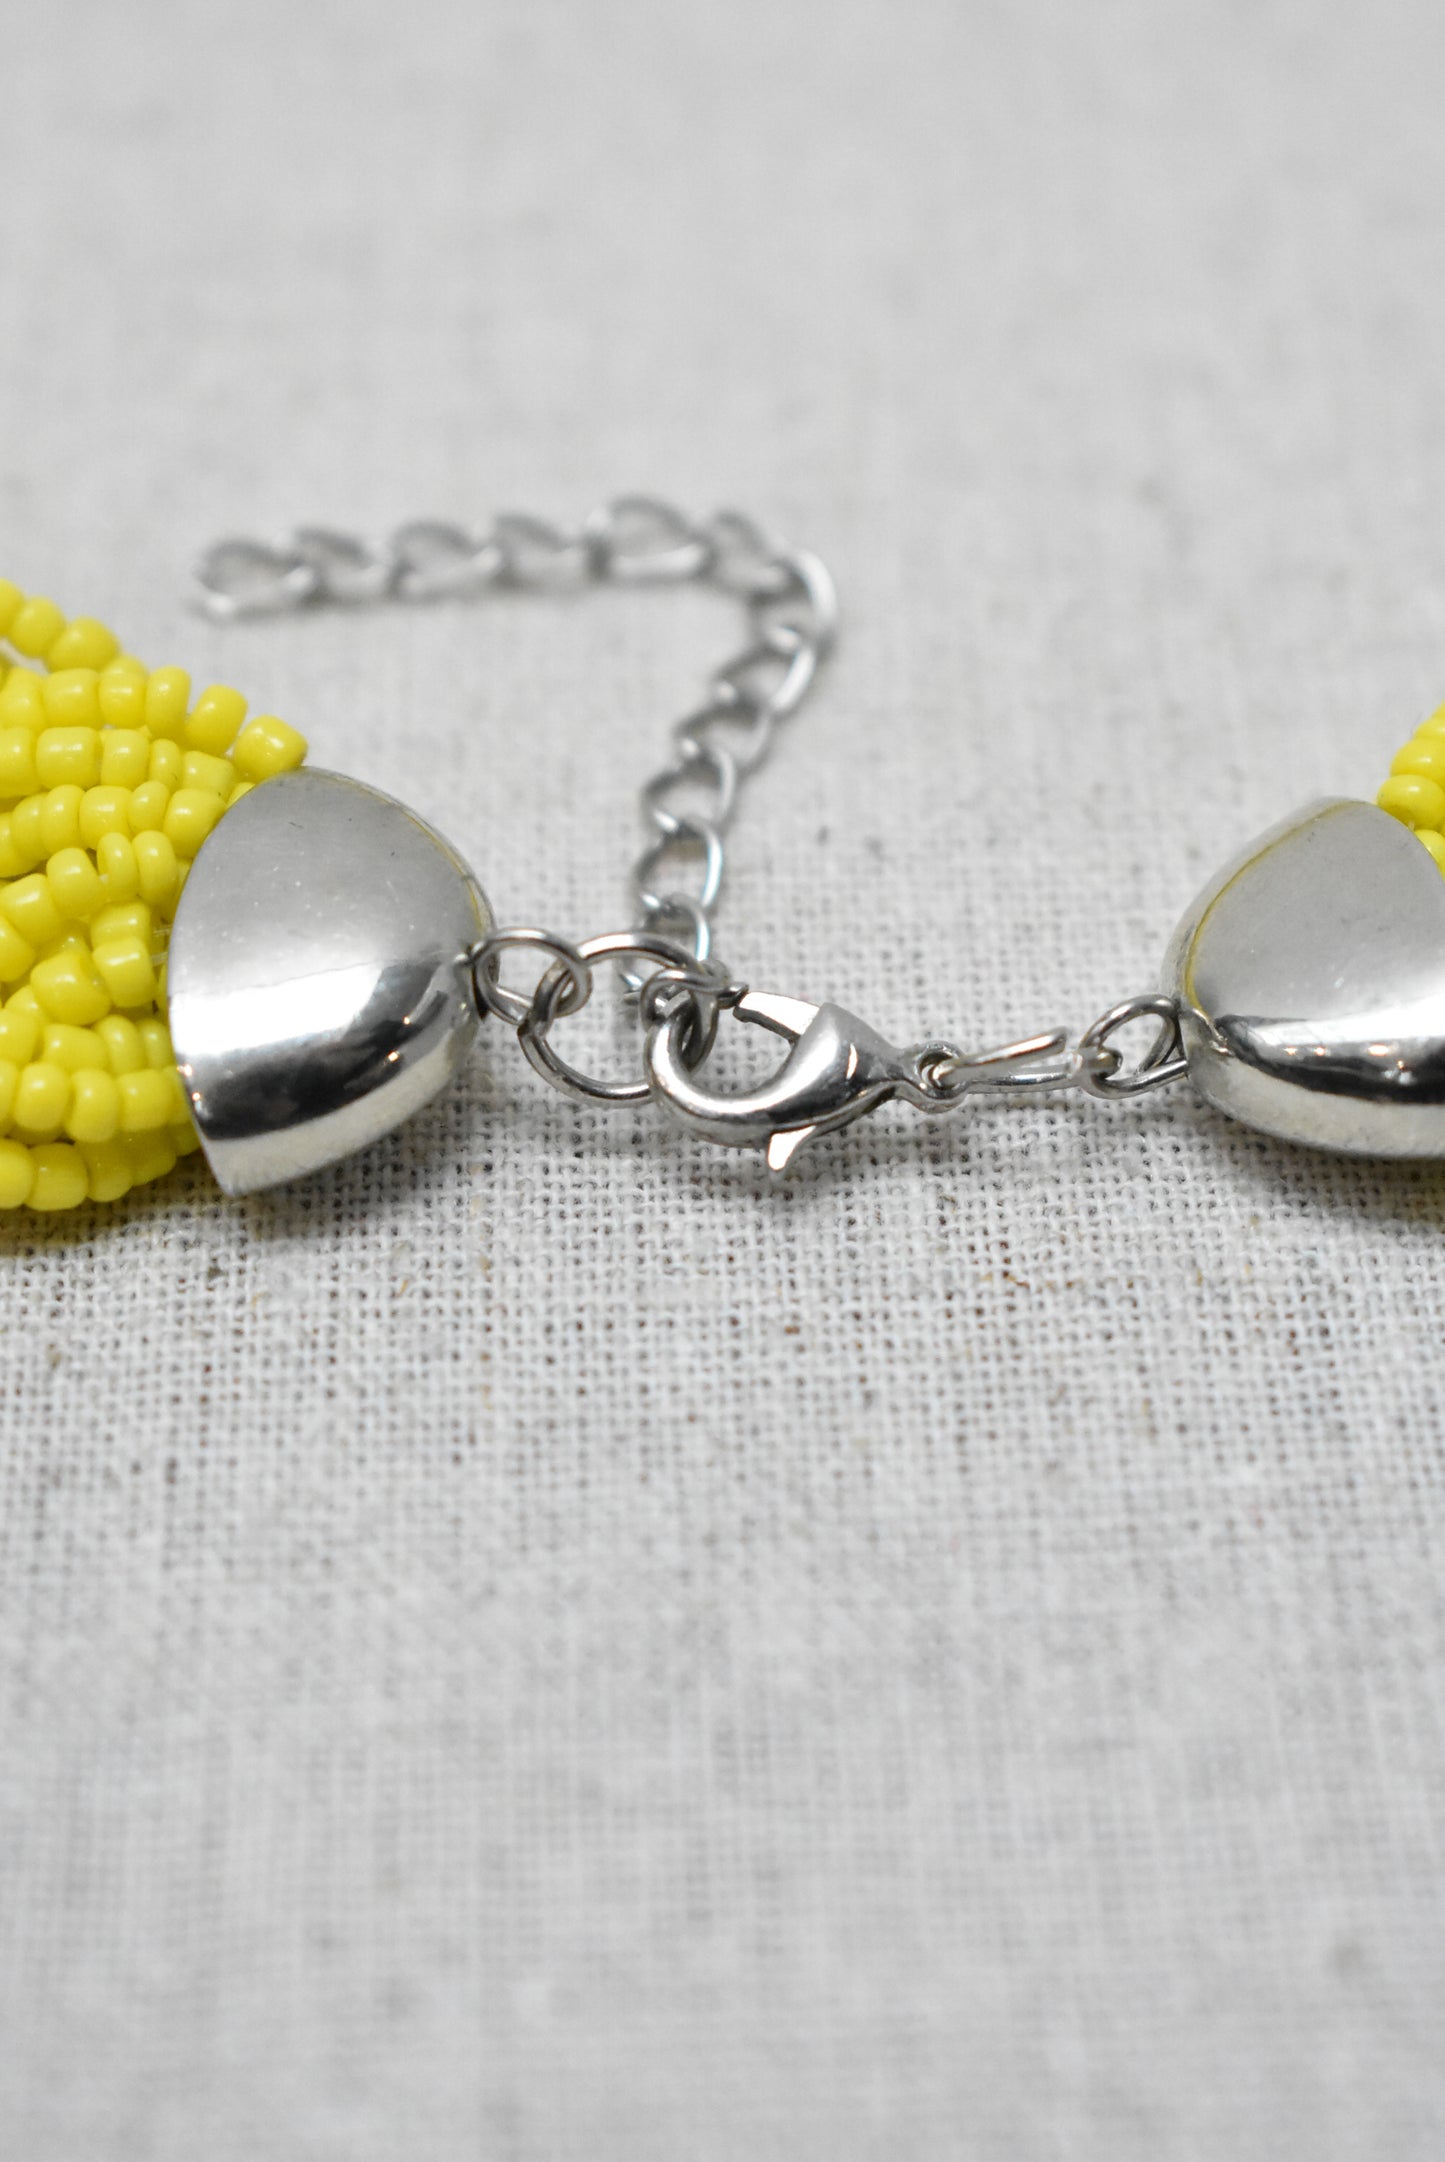 Yellow beaded plait necklace